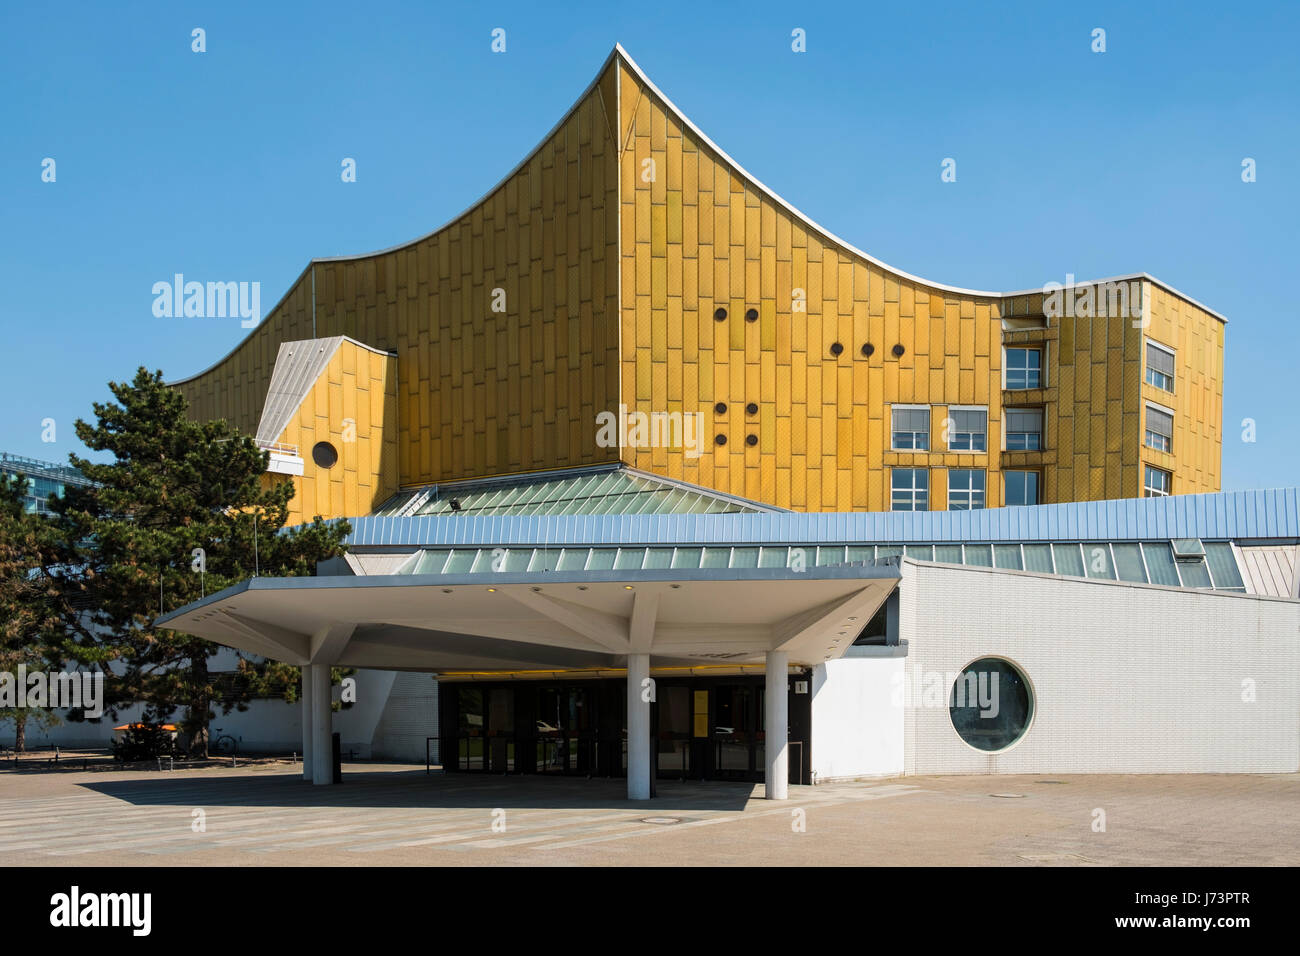 Exterior view of Berlin Philharmonie concert hall, home of Berlin Philharmonic (Berliner Philharmoniker) orchestra in Berlin, Germany Stock Photo